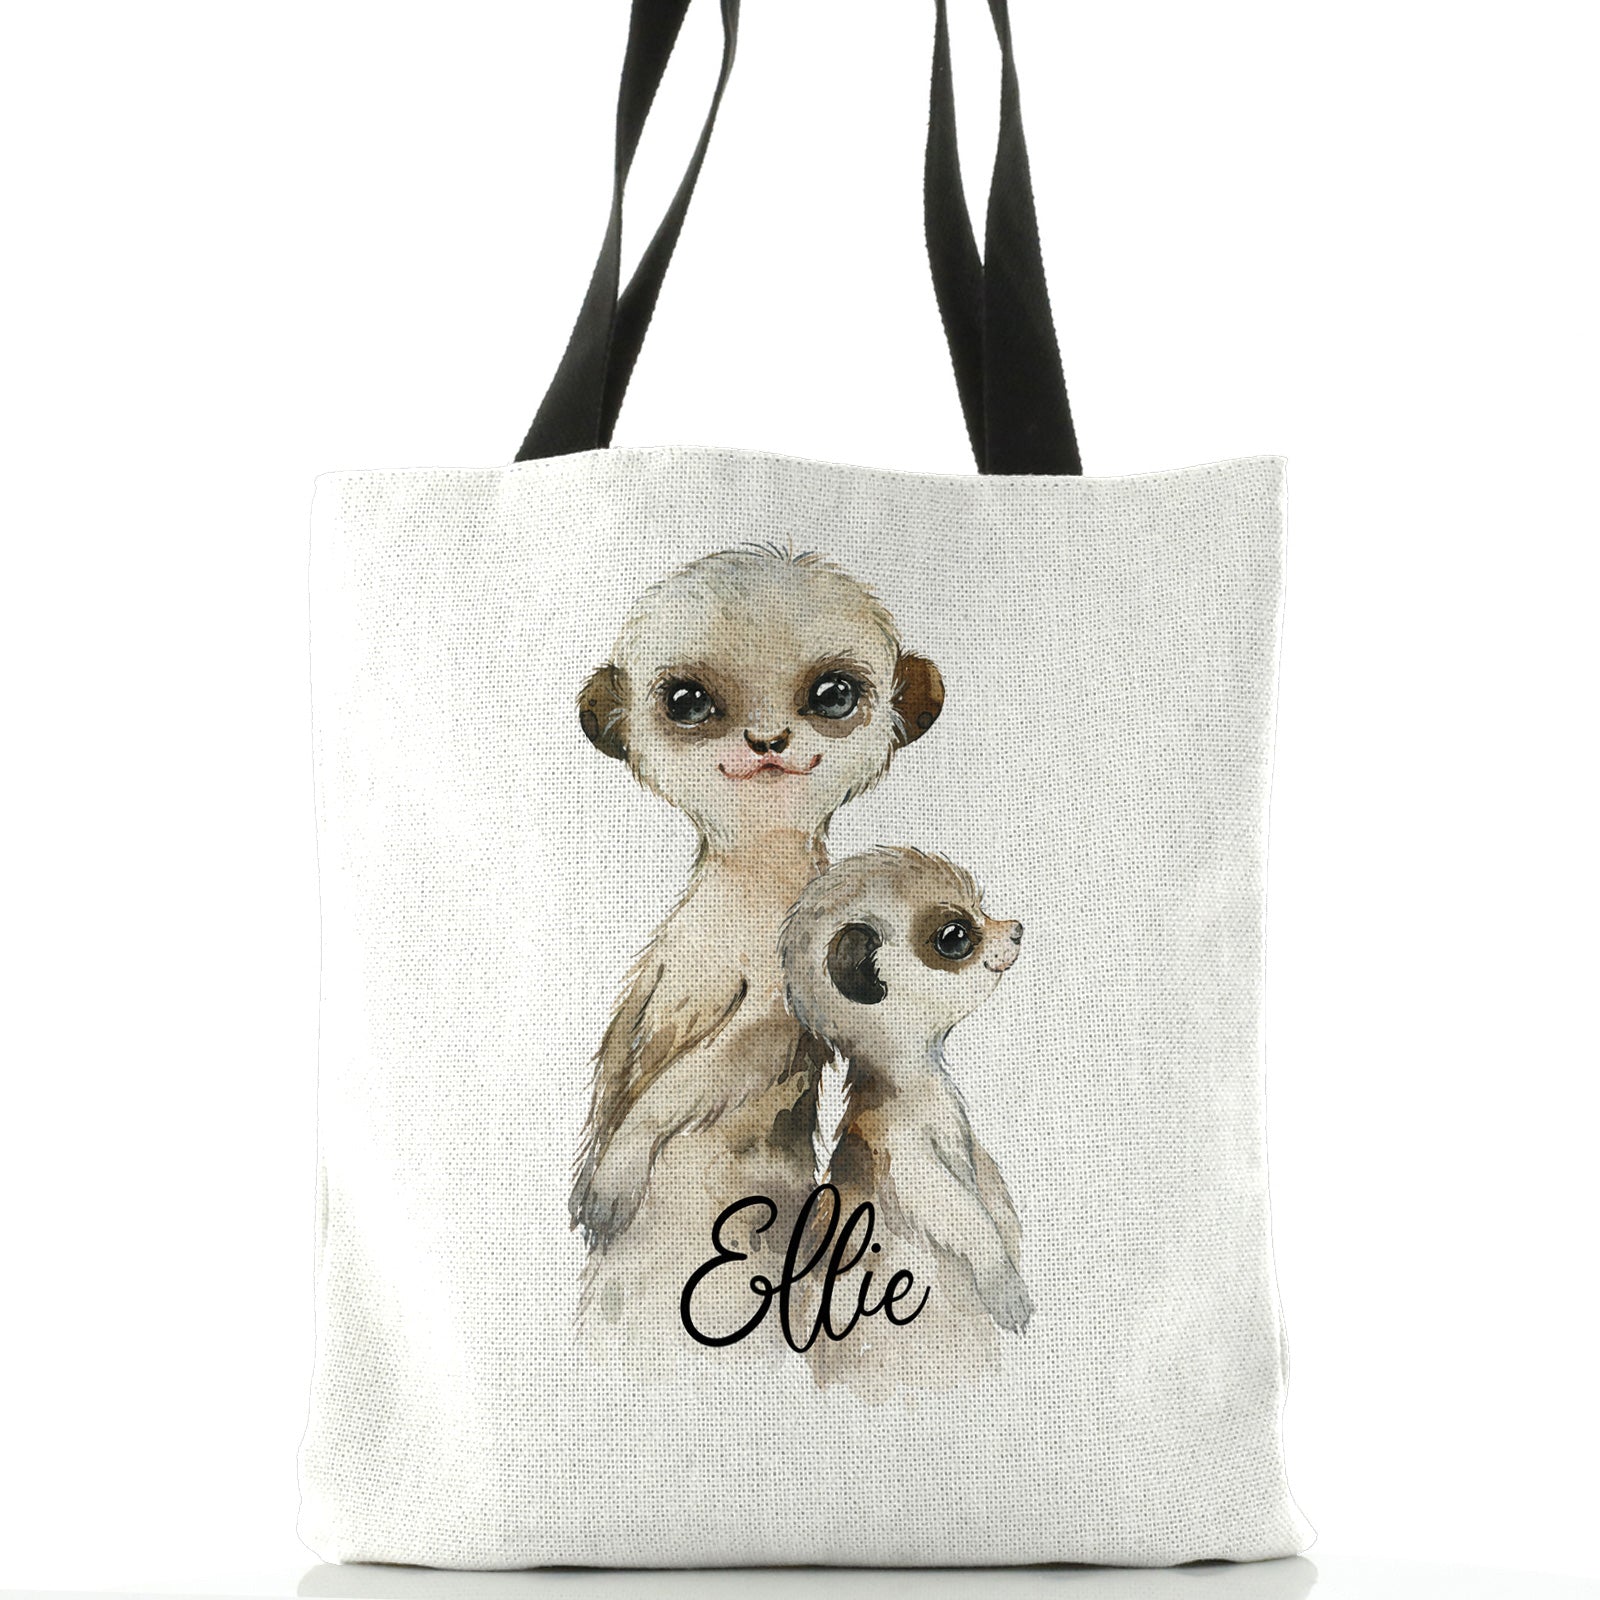 Personalised White Tote Bag with Meerkat Baby and Adult and Cute Text